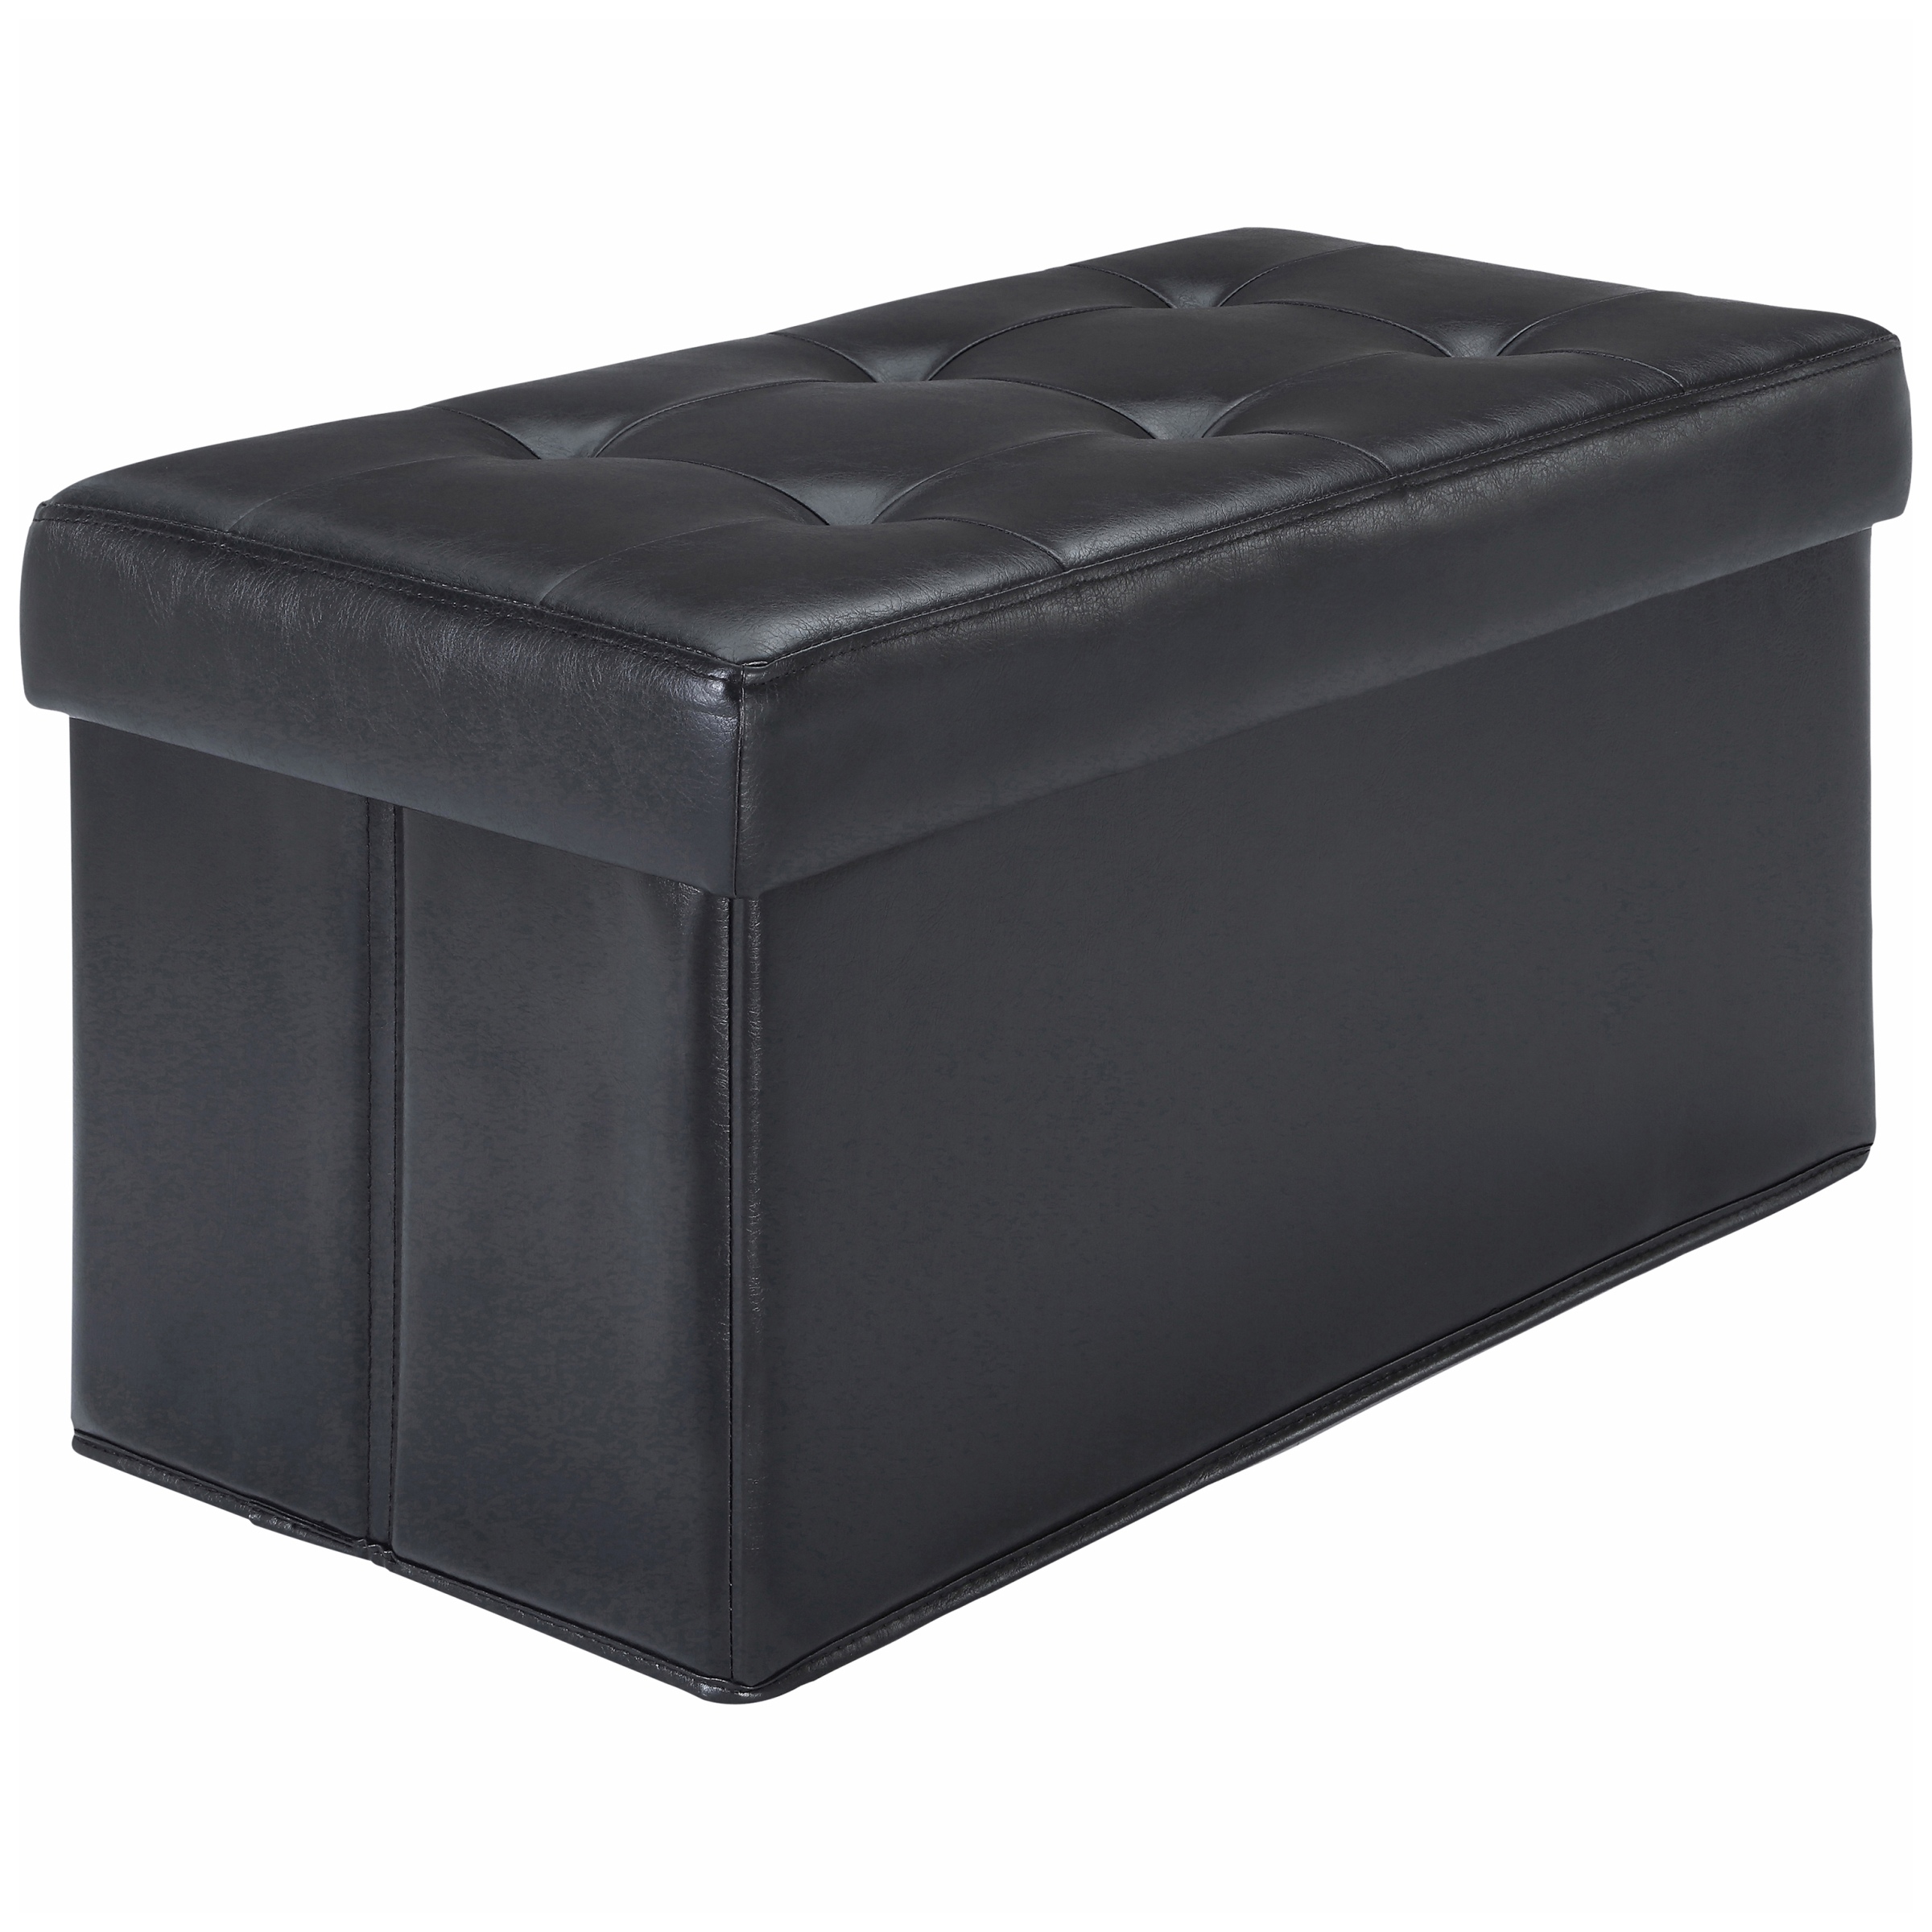 Mainstays 30-inch Collapsible Storage Ottoman, Quilted Black Faux Leather - image 5 of 6